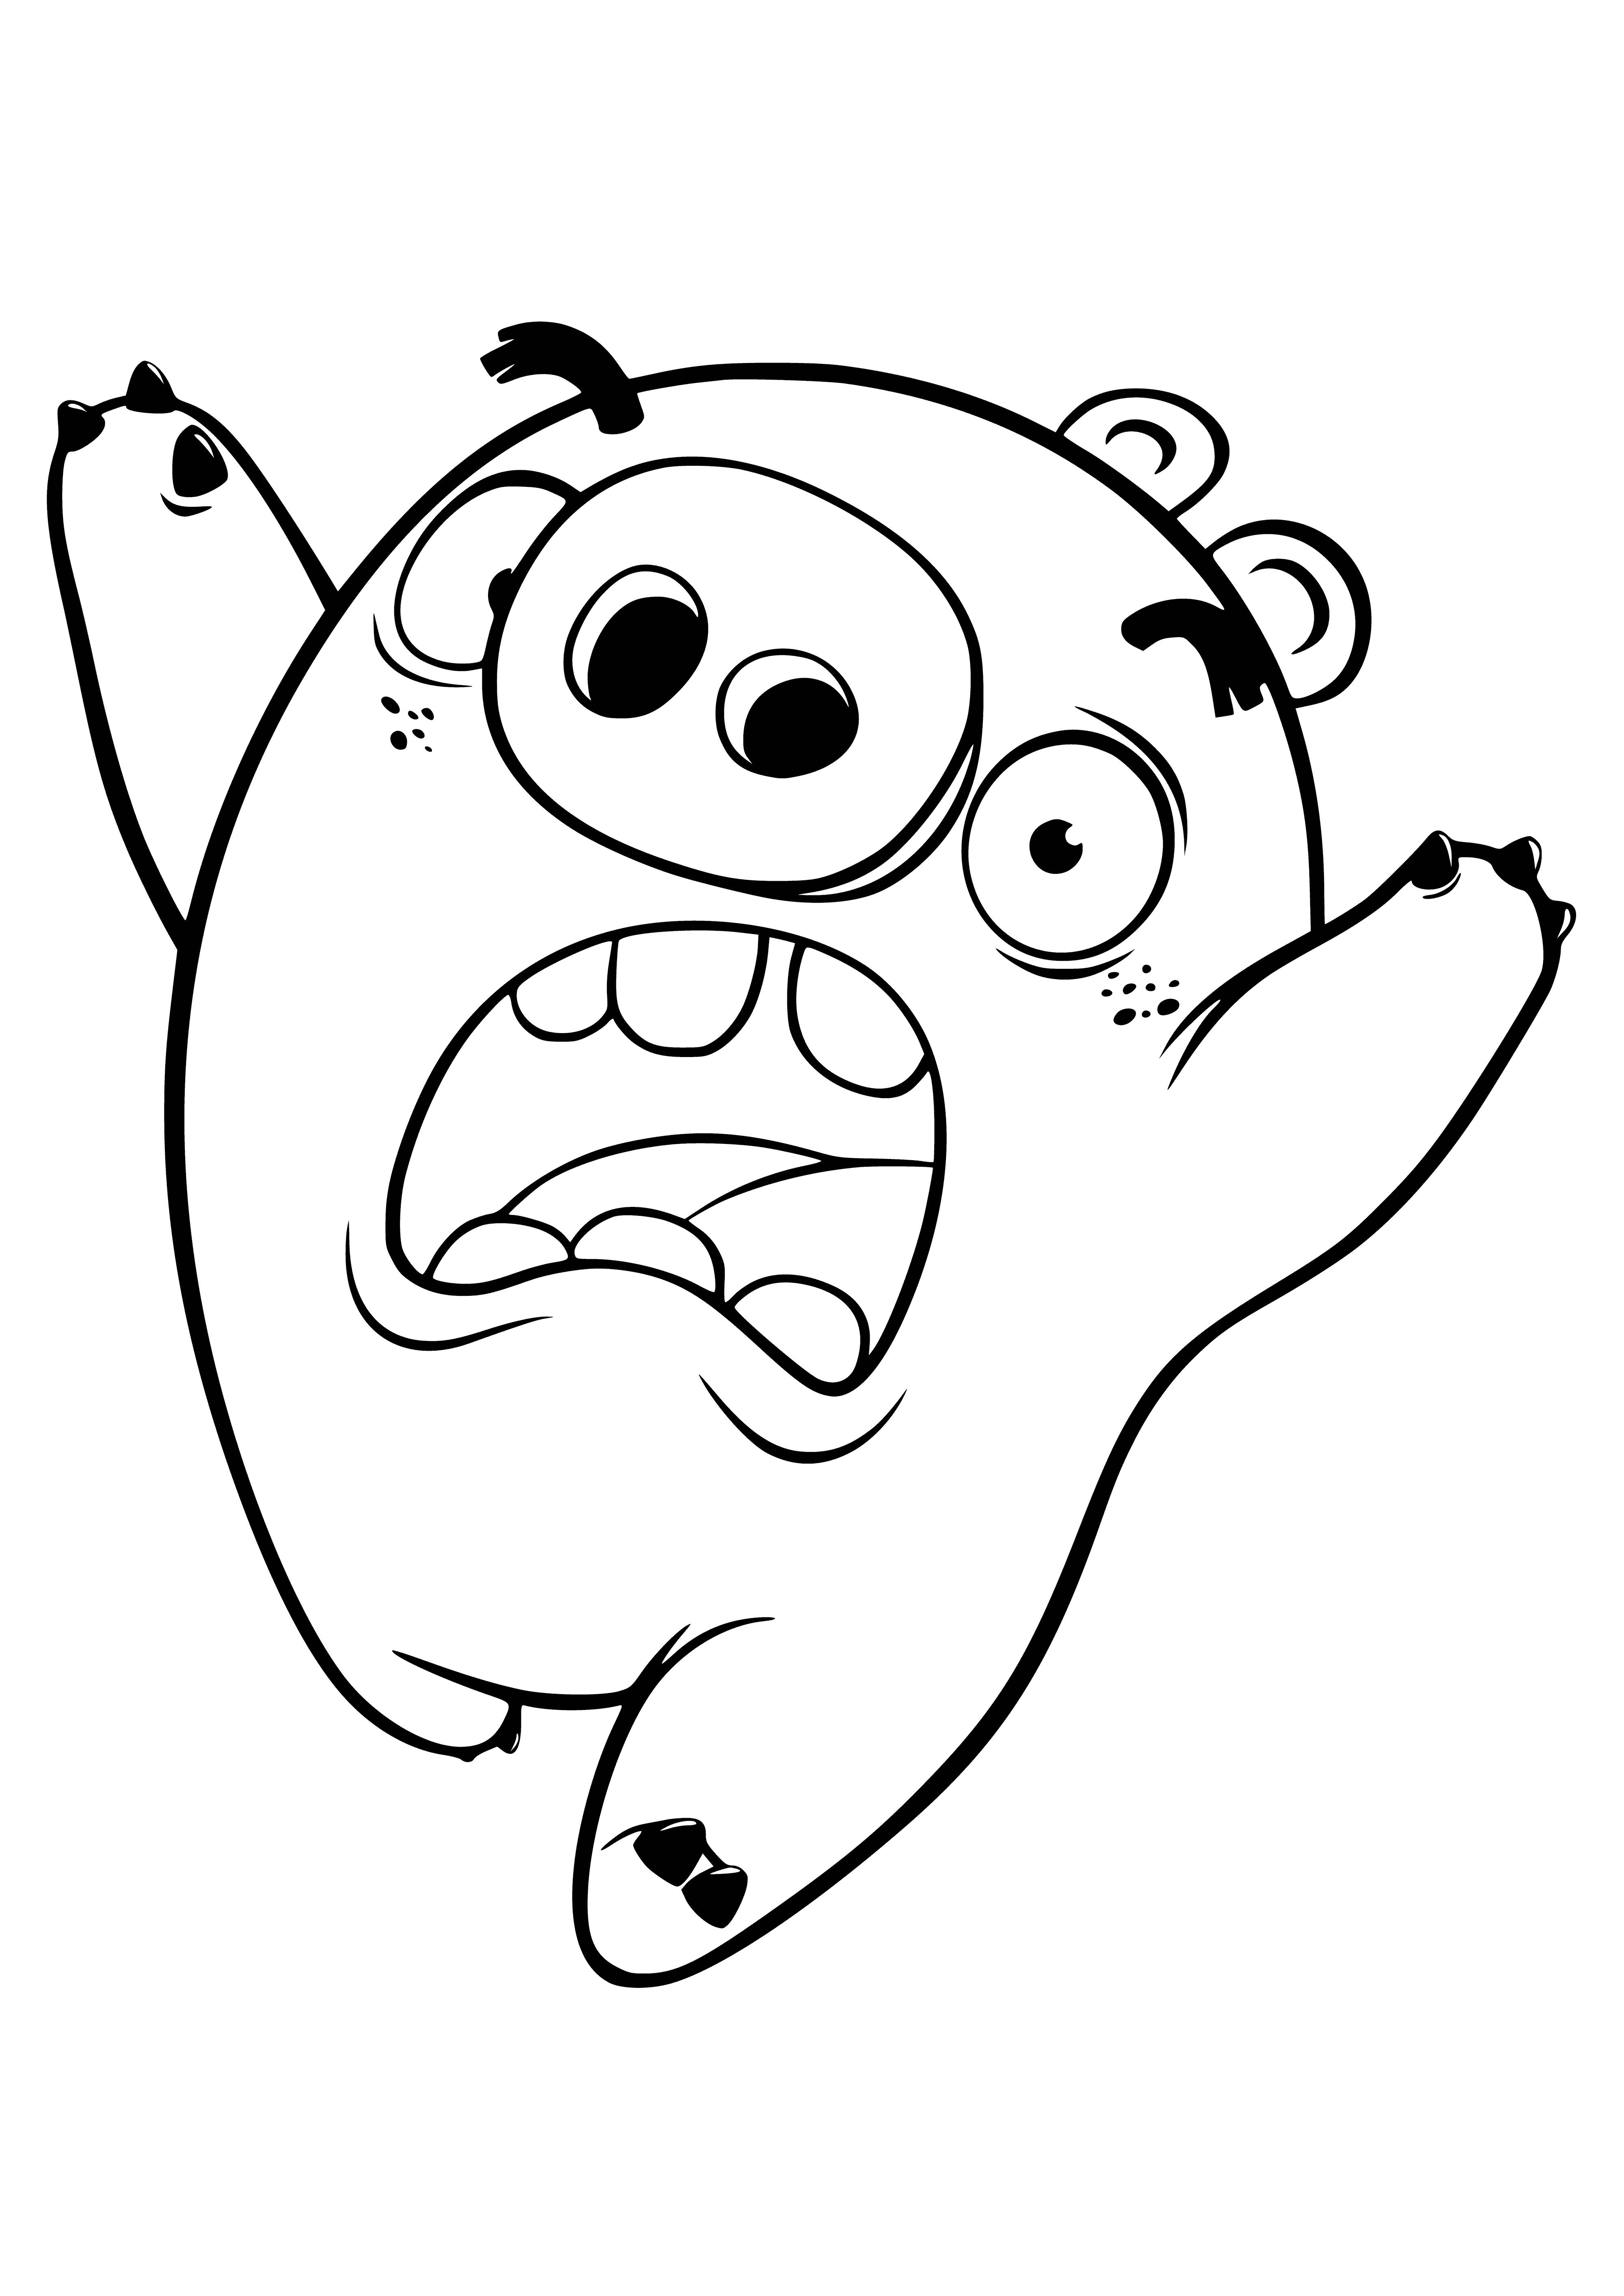 Pig Ross scared coloring page